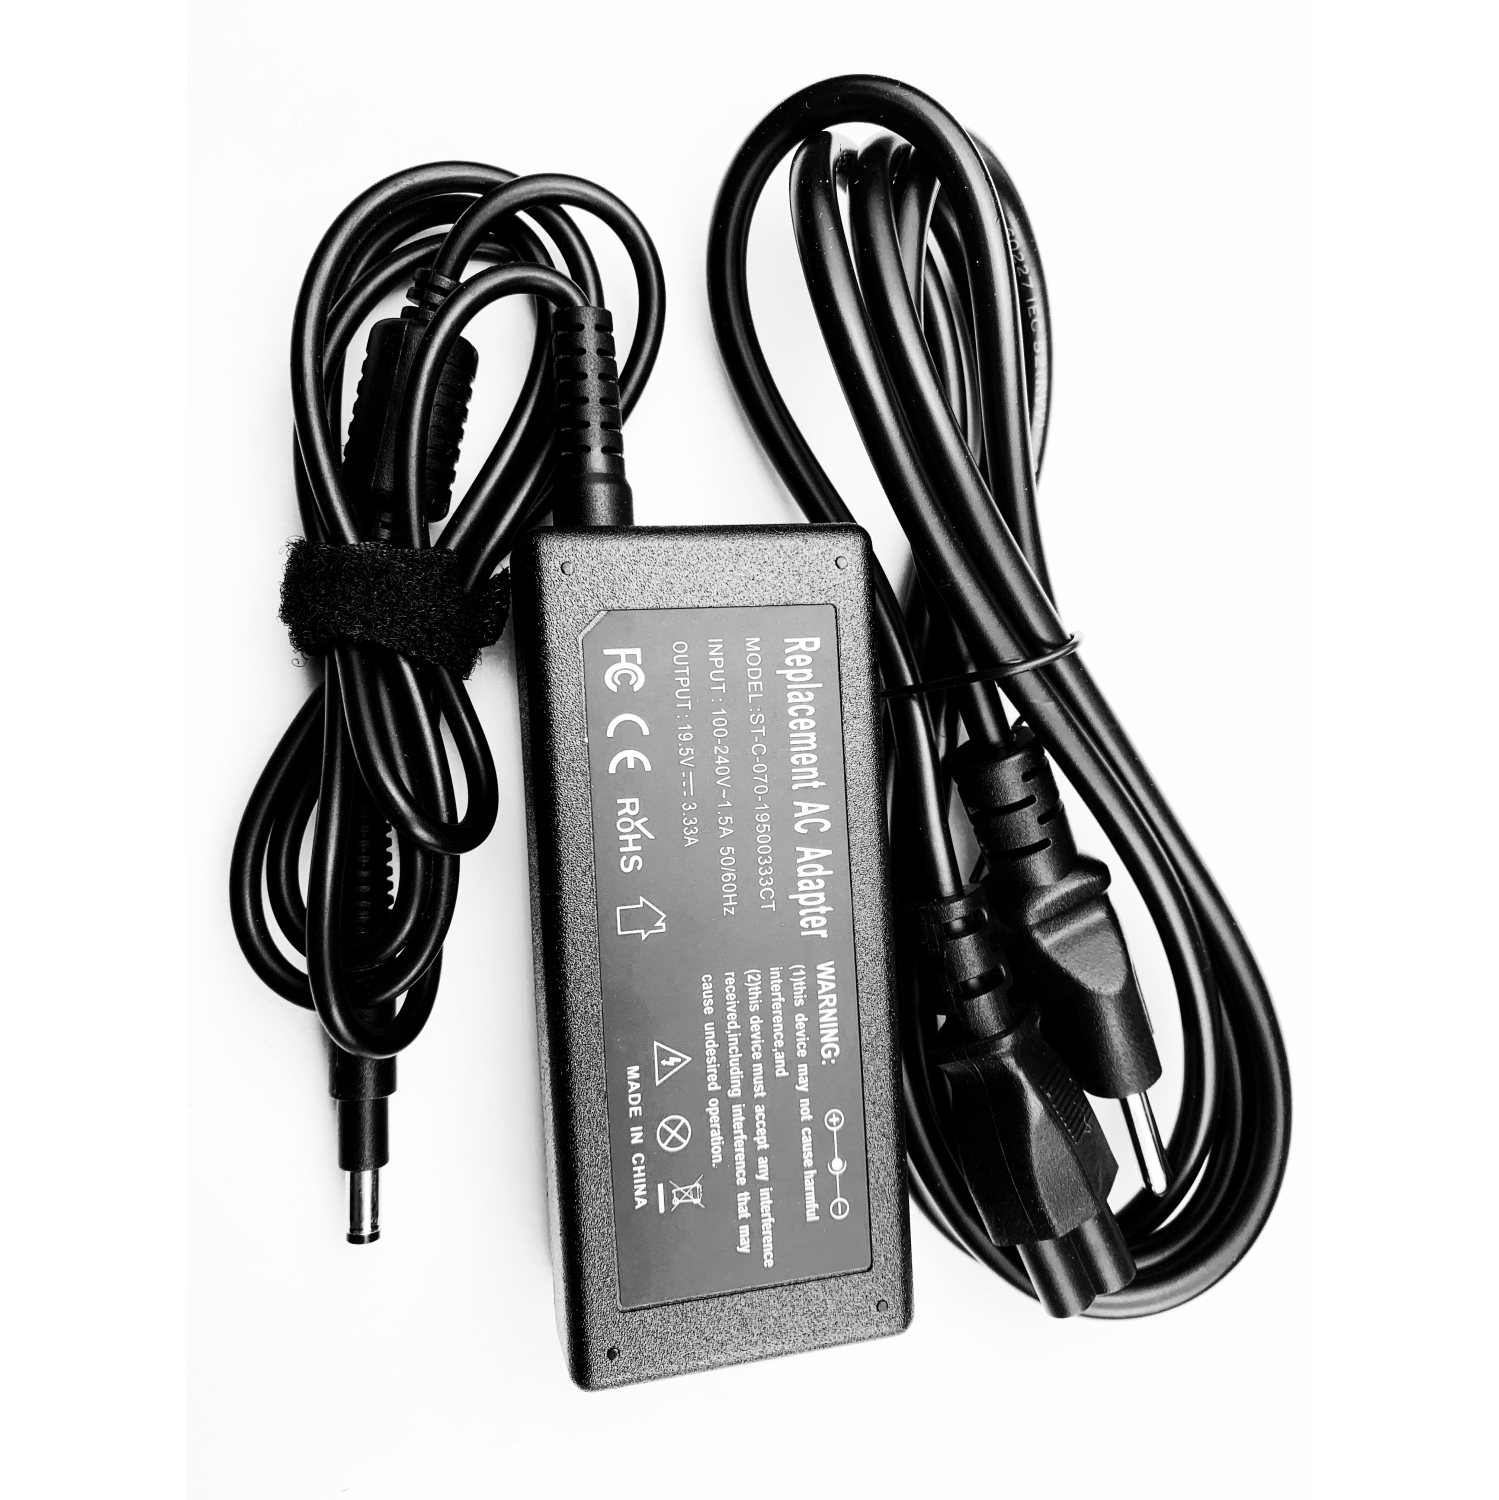 19.5V 65W 4.75mm x 1.7mm new AC adapter power cord charger for HP ULtrabook ENVY 4